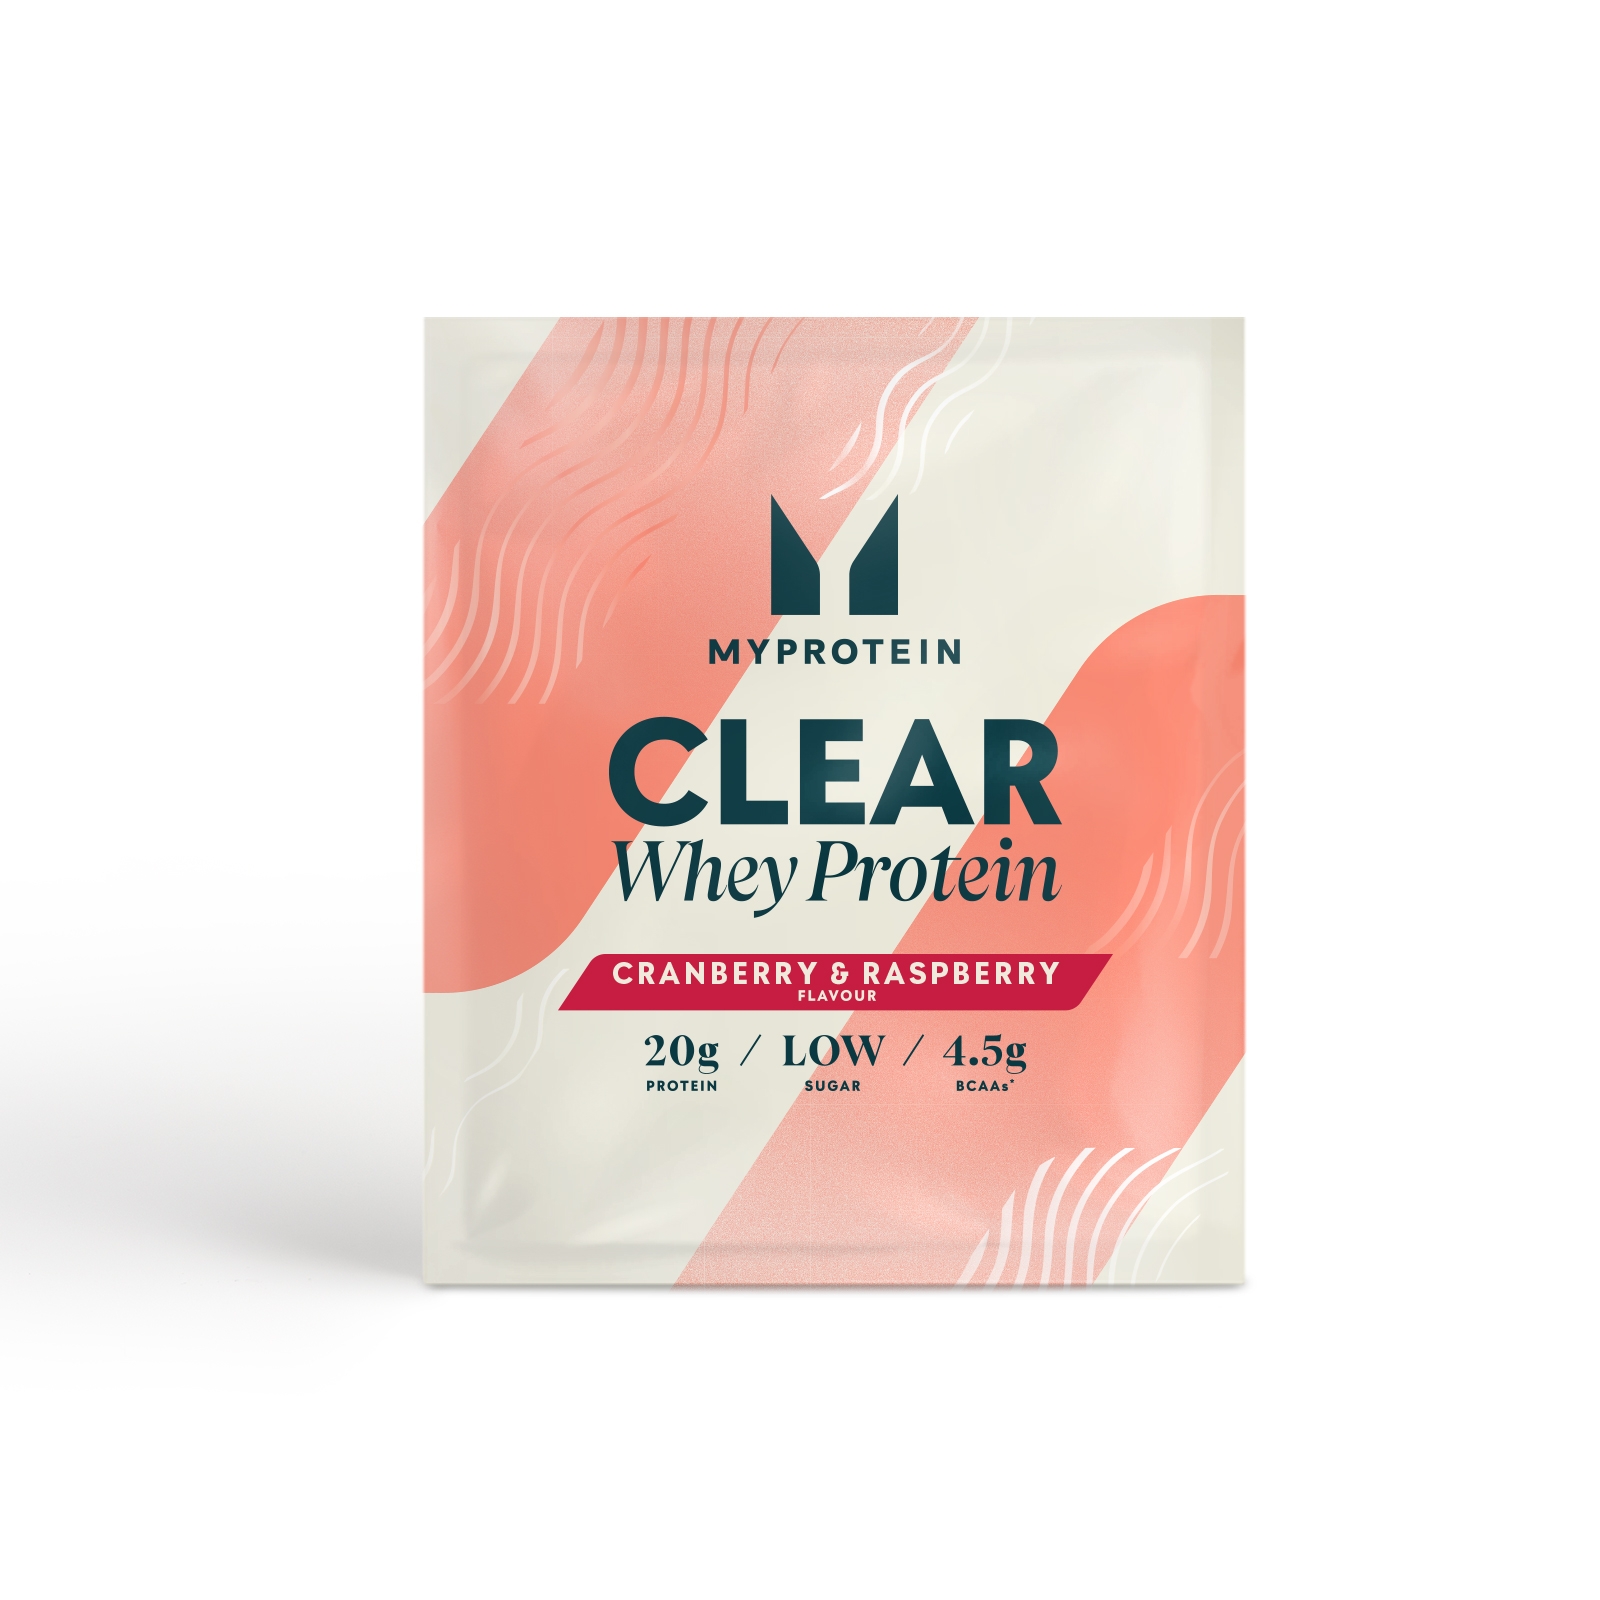 E-shop Myprotein Clear Whey Isolate (Sample) - 1servings - Cranberry & Raspberry